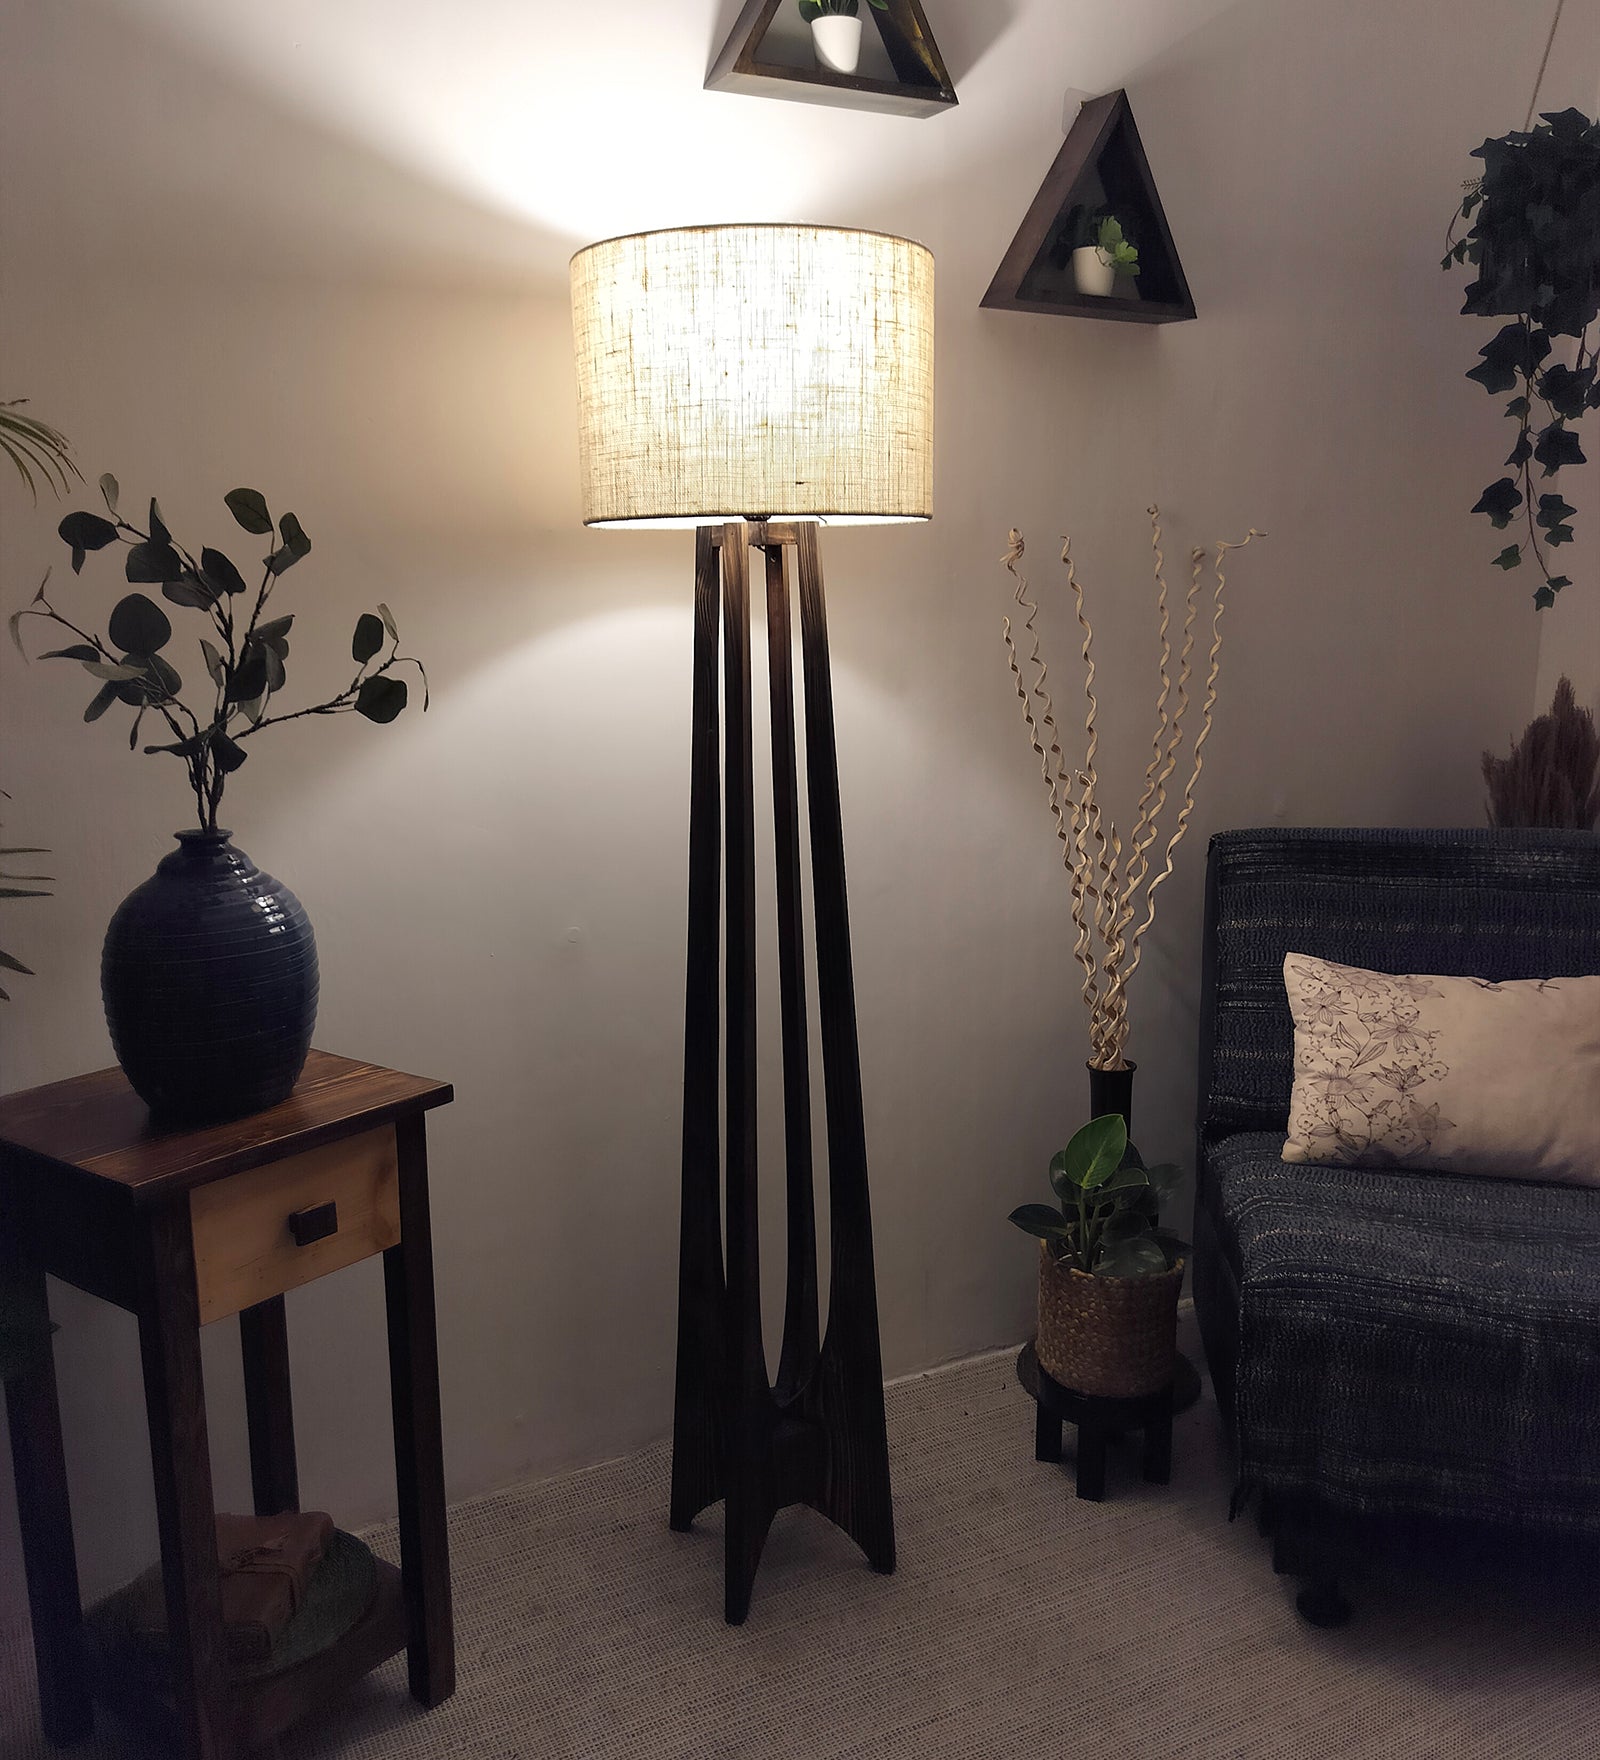 Camille Wooden Floor Lamp with Brown Base and Jute Fabric Lampshade (BULB NOT INCLUDED)